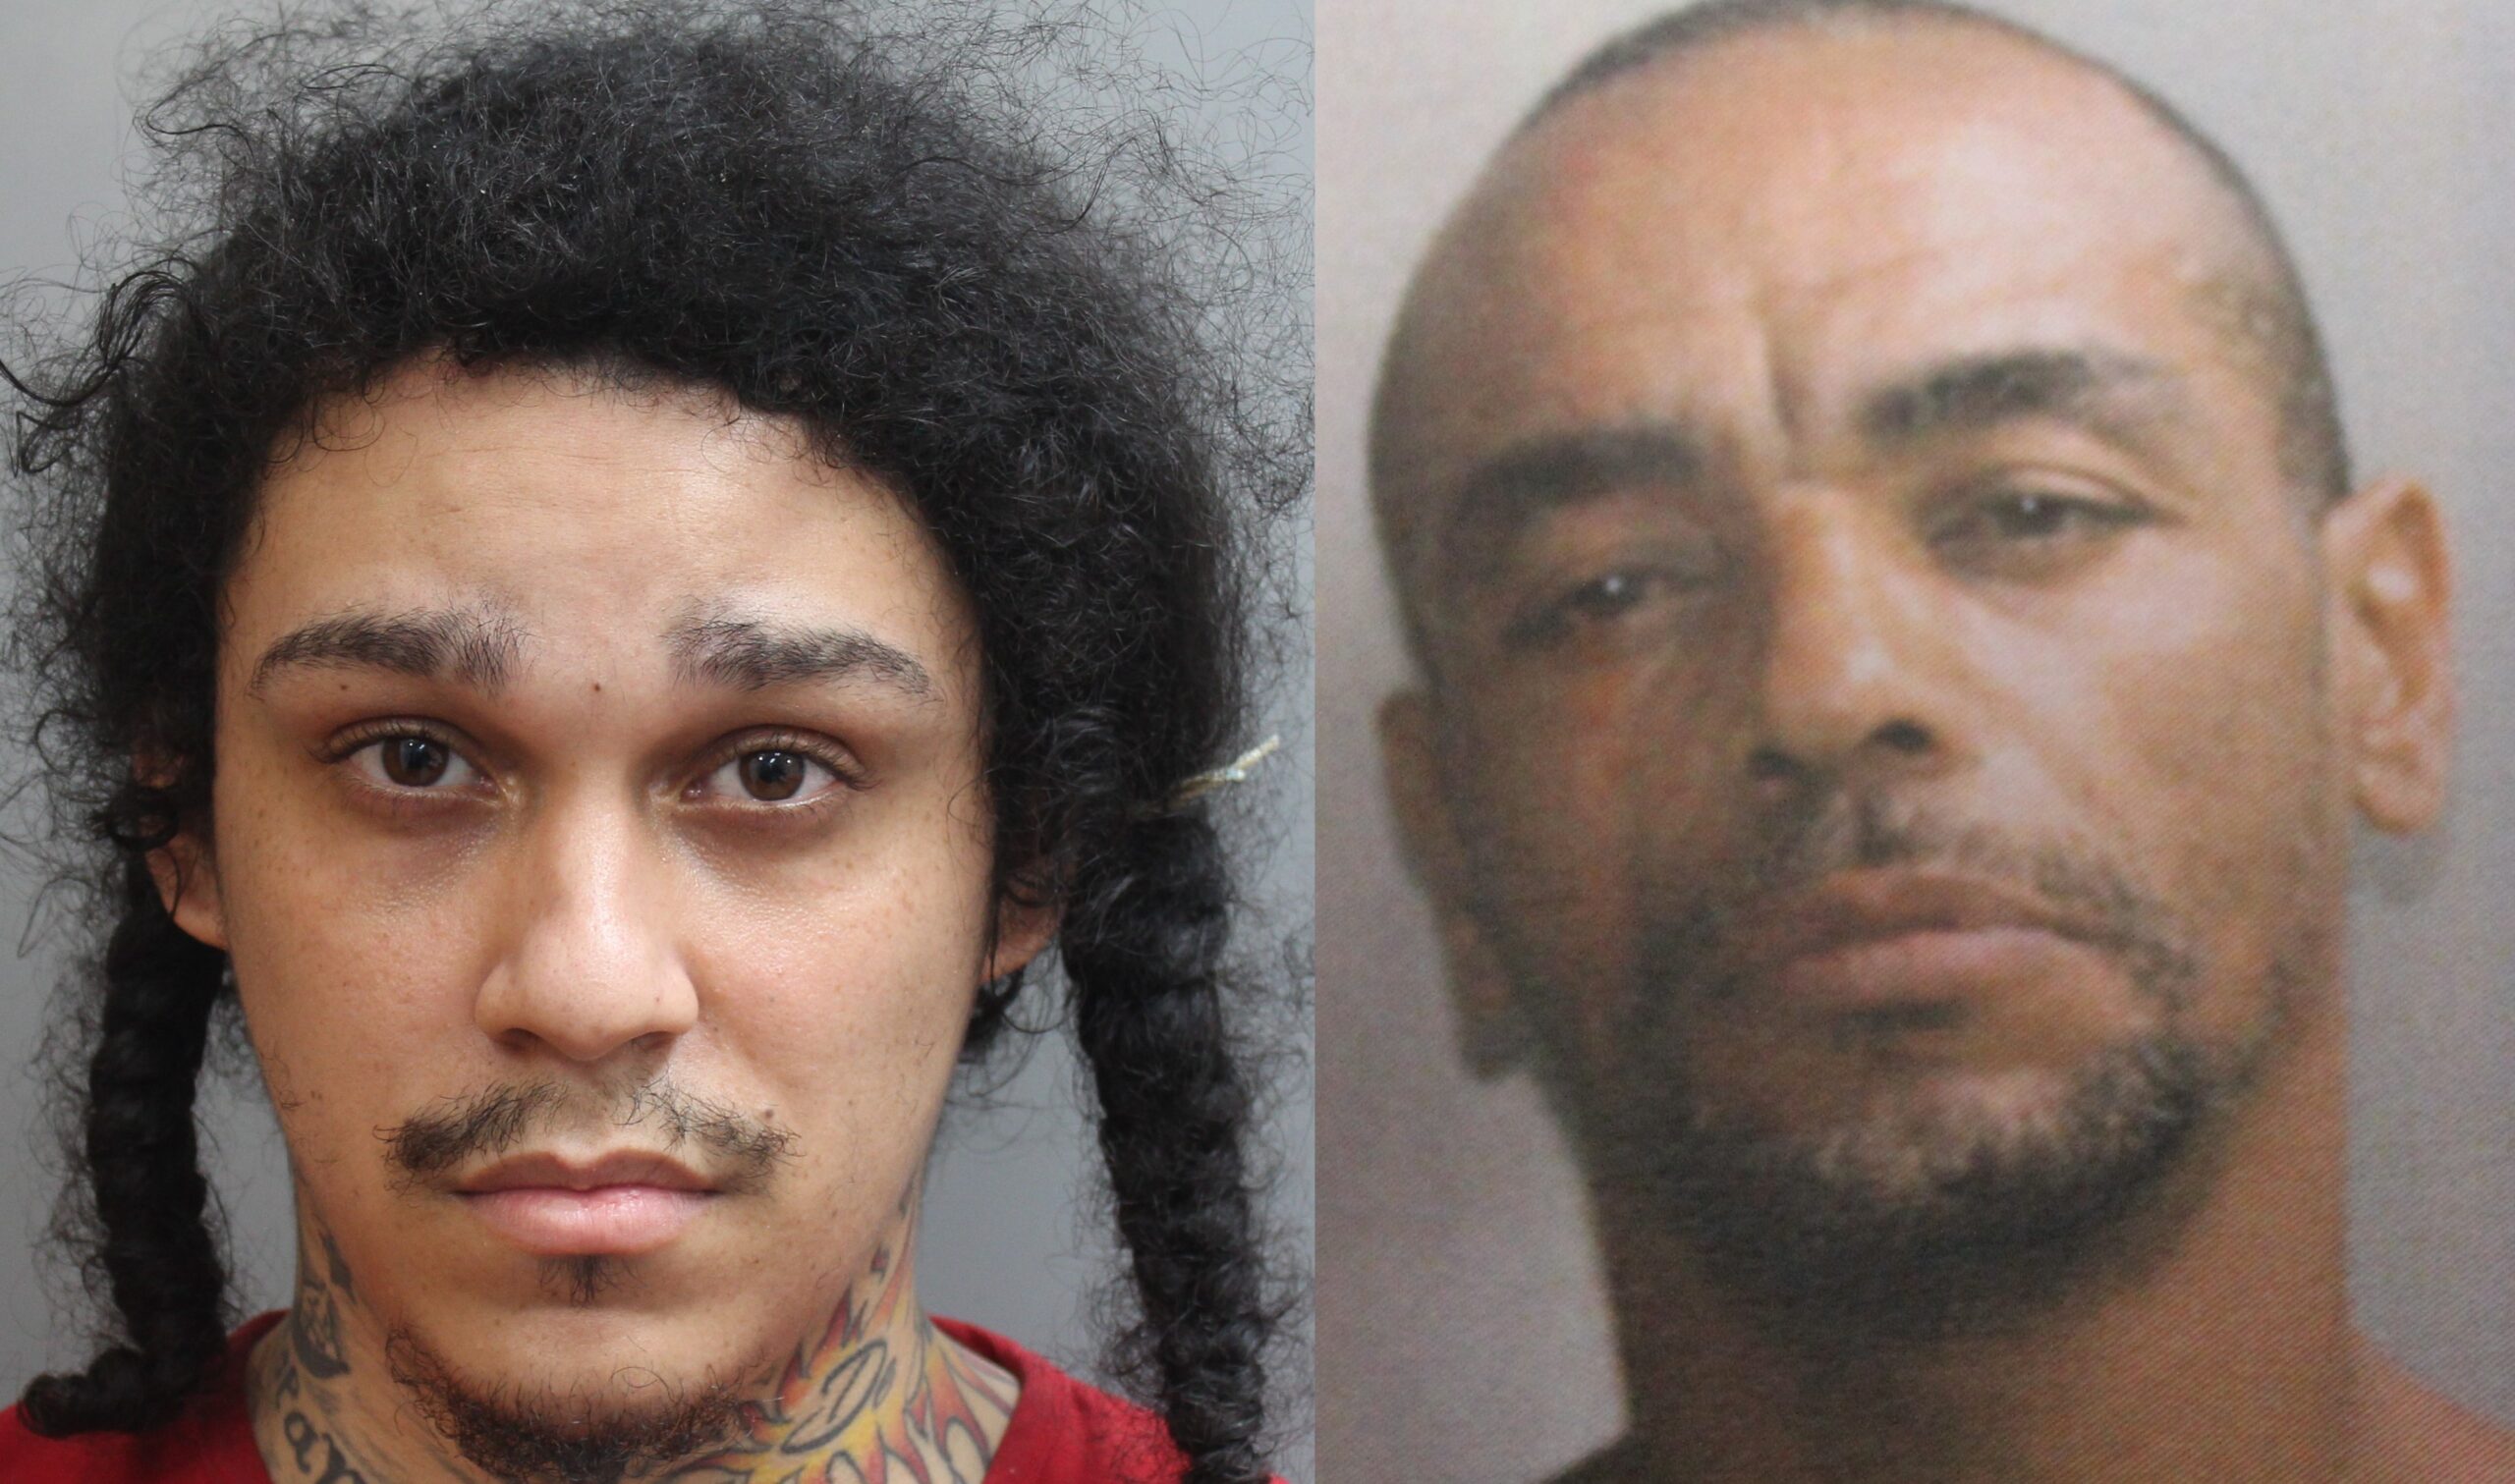 2 Prison Inmates Shank 2 Others With Machete, Knife Leading To 'Life-Threatening' Injuries: VIPD